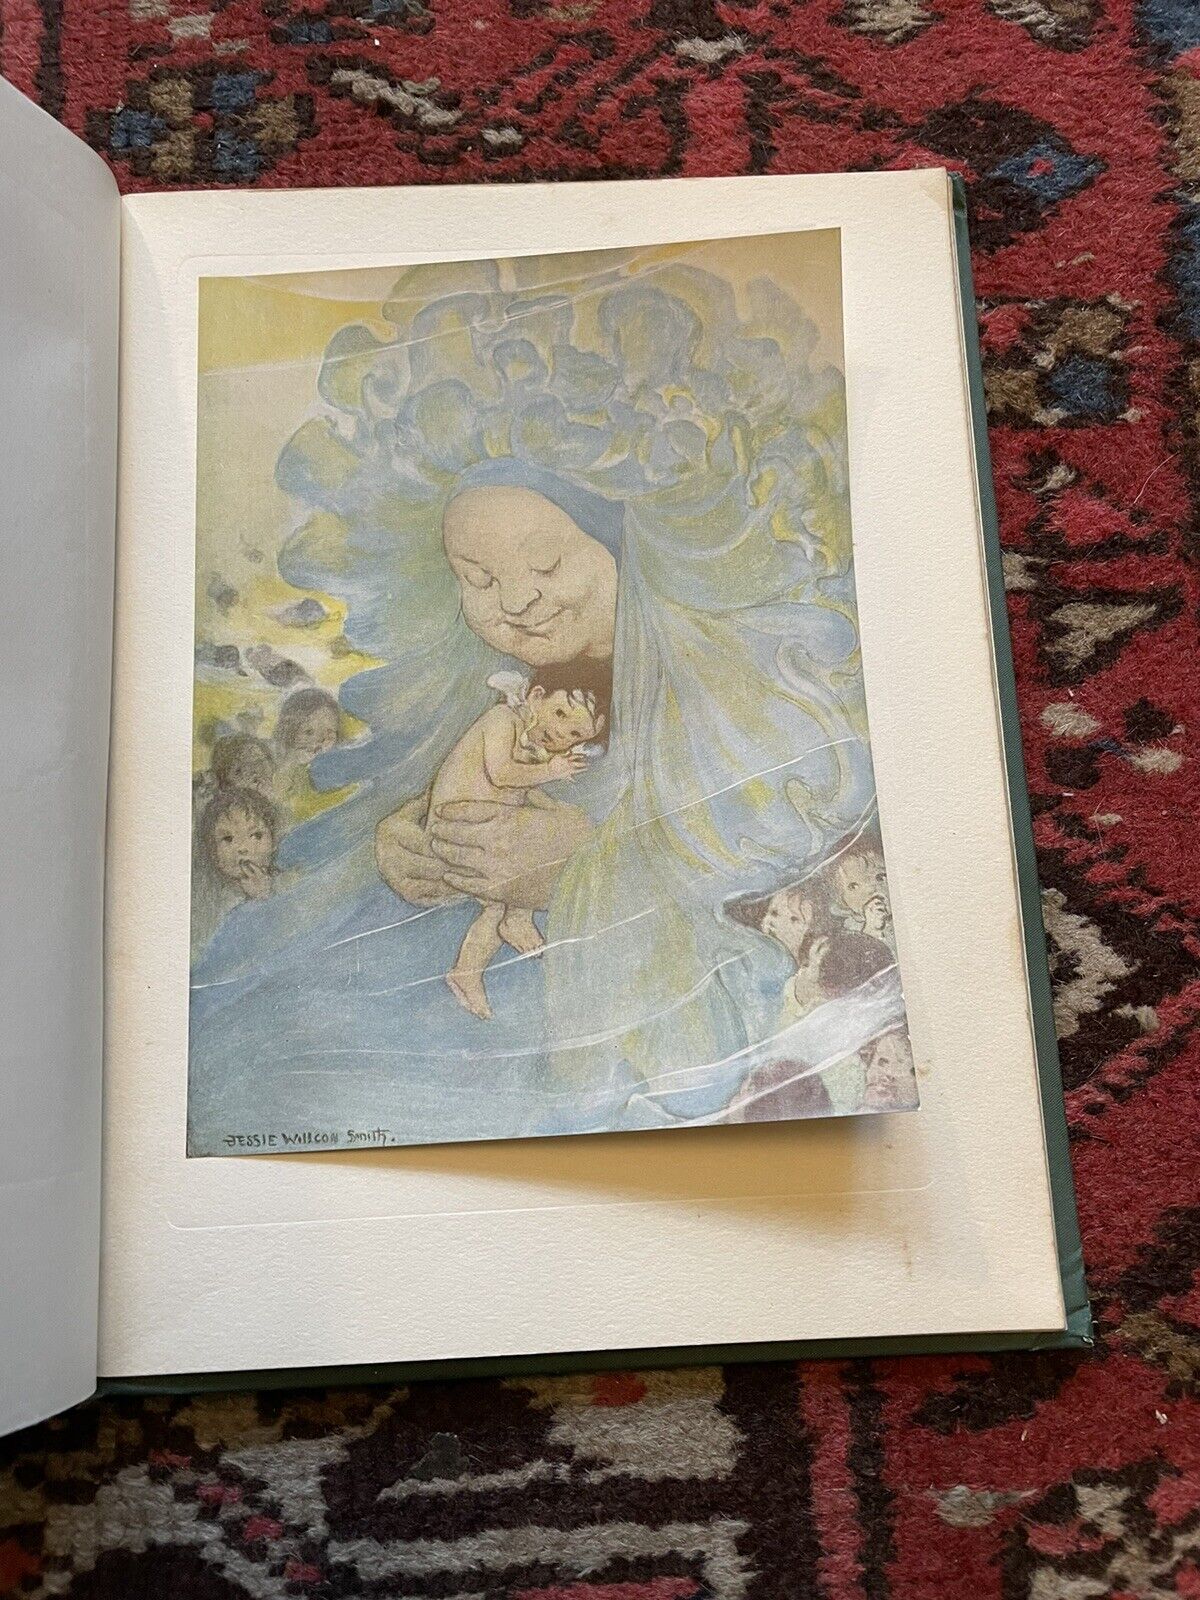 1919 The Water Babies (12 Colour Plates) Jessie Willcox Smith : Charles Kingsley